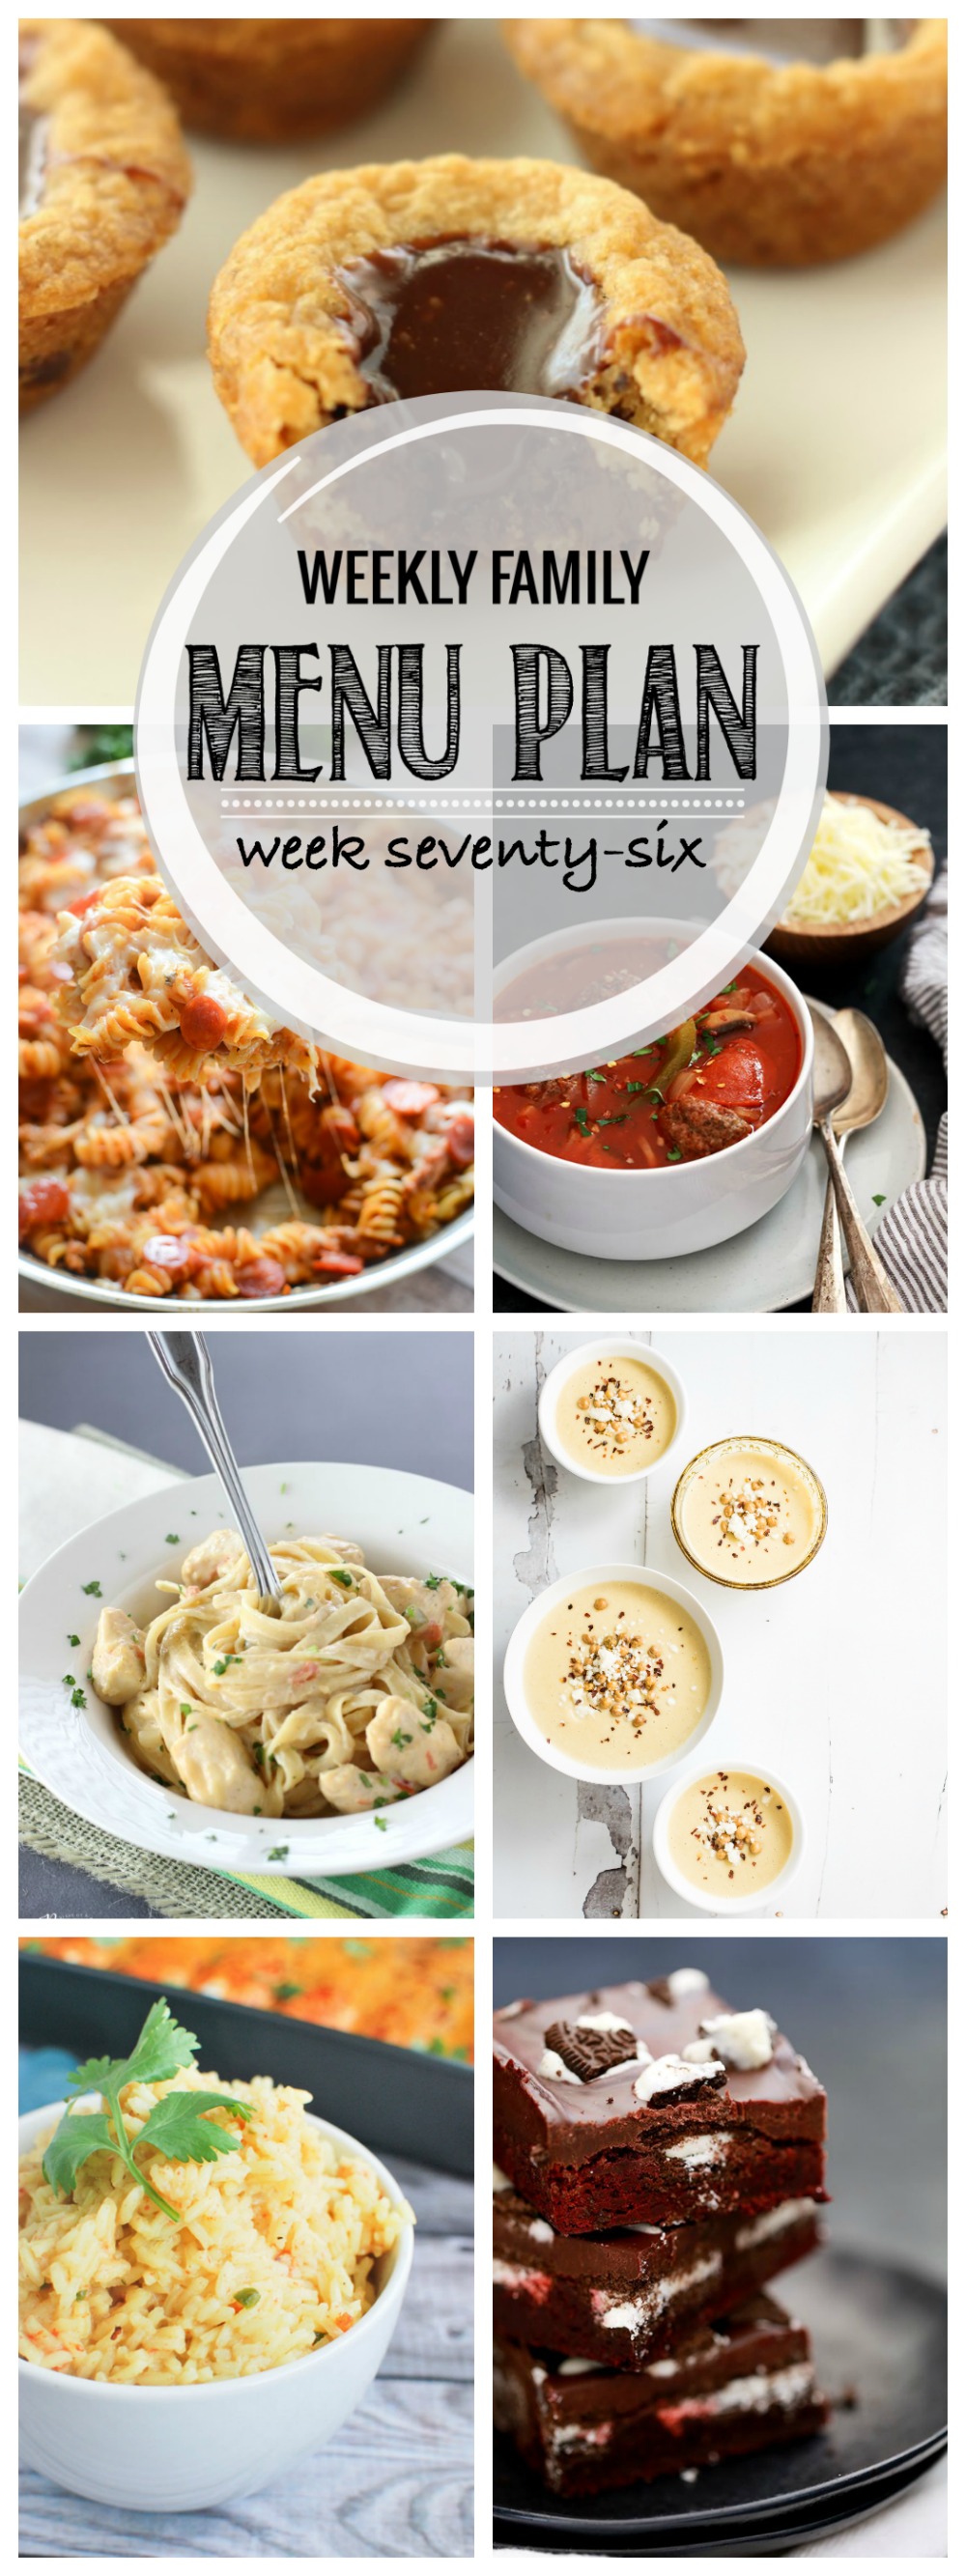 Weekly Family Menu Plan - Week Seventy-Six is brought to you by a group of food bloggers who love to plan ahead! A weekly edition of thoughtfully prepared recipes is rounded up to get you through those busy weeks! | www.cookingandbeer.com